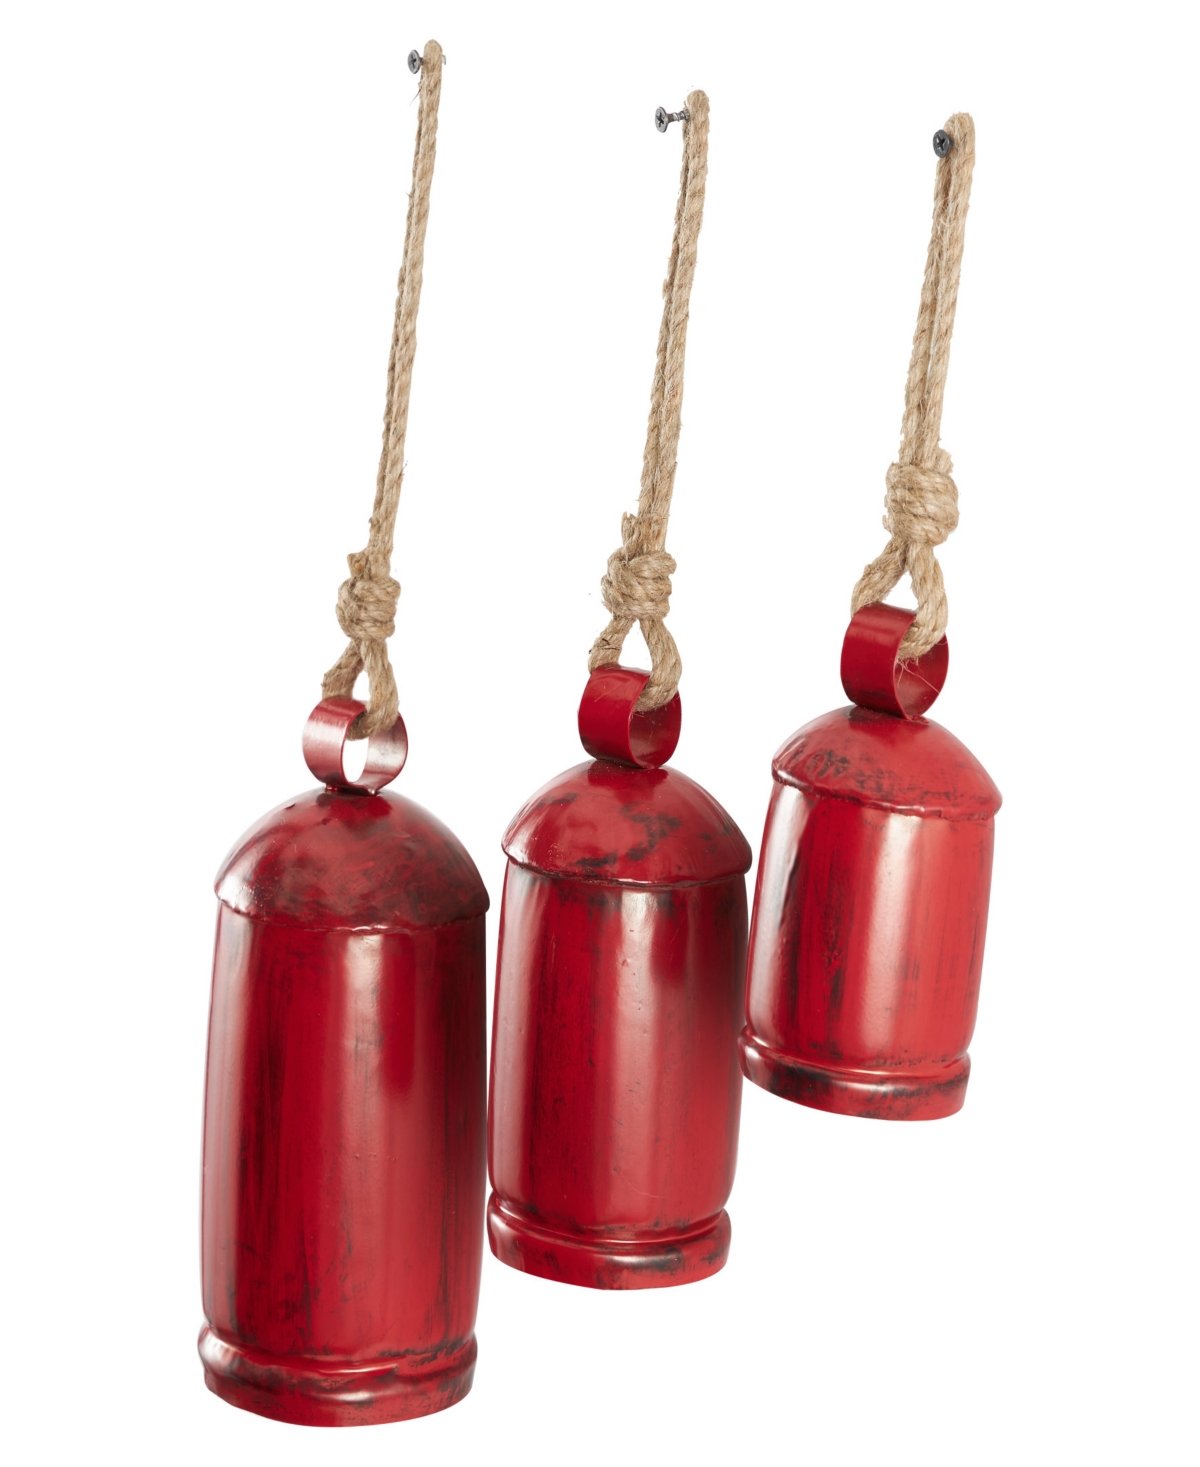 Rosemary Lane Metal Tibetan Inspired Decorative Cow Bell With Jute Hanging Rope, Set Of 3, 10",8",6"h In Red